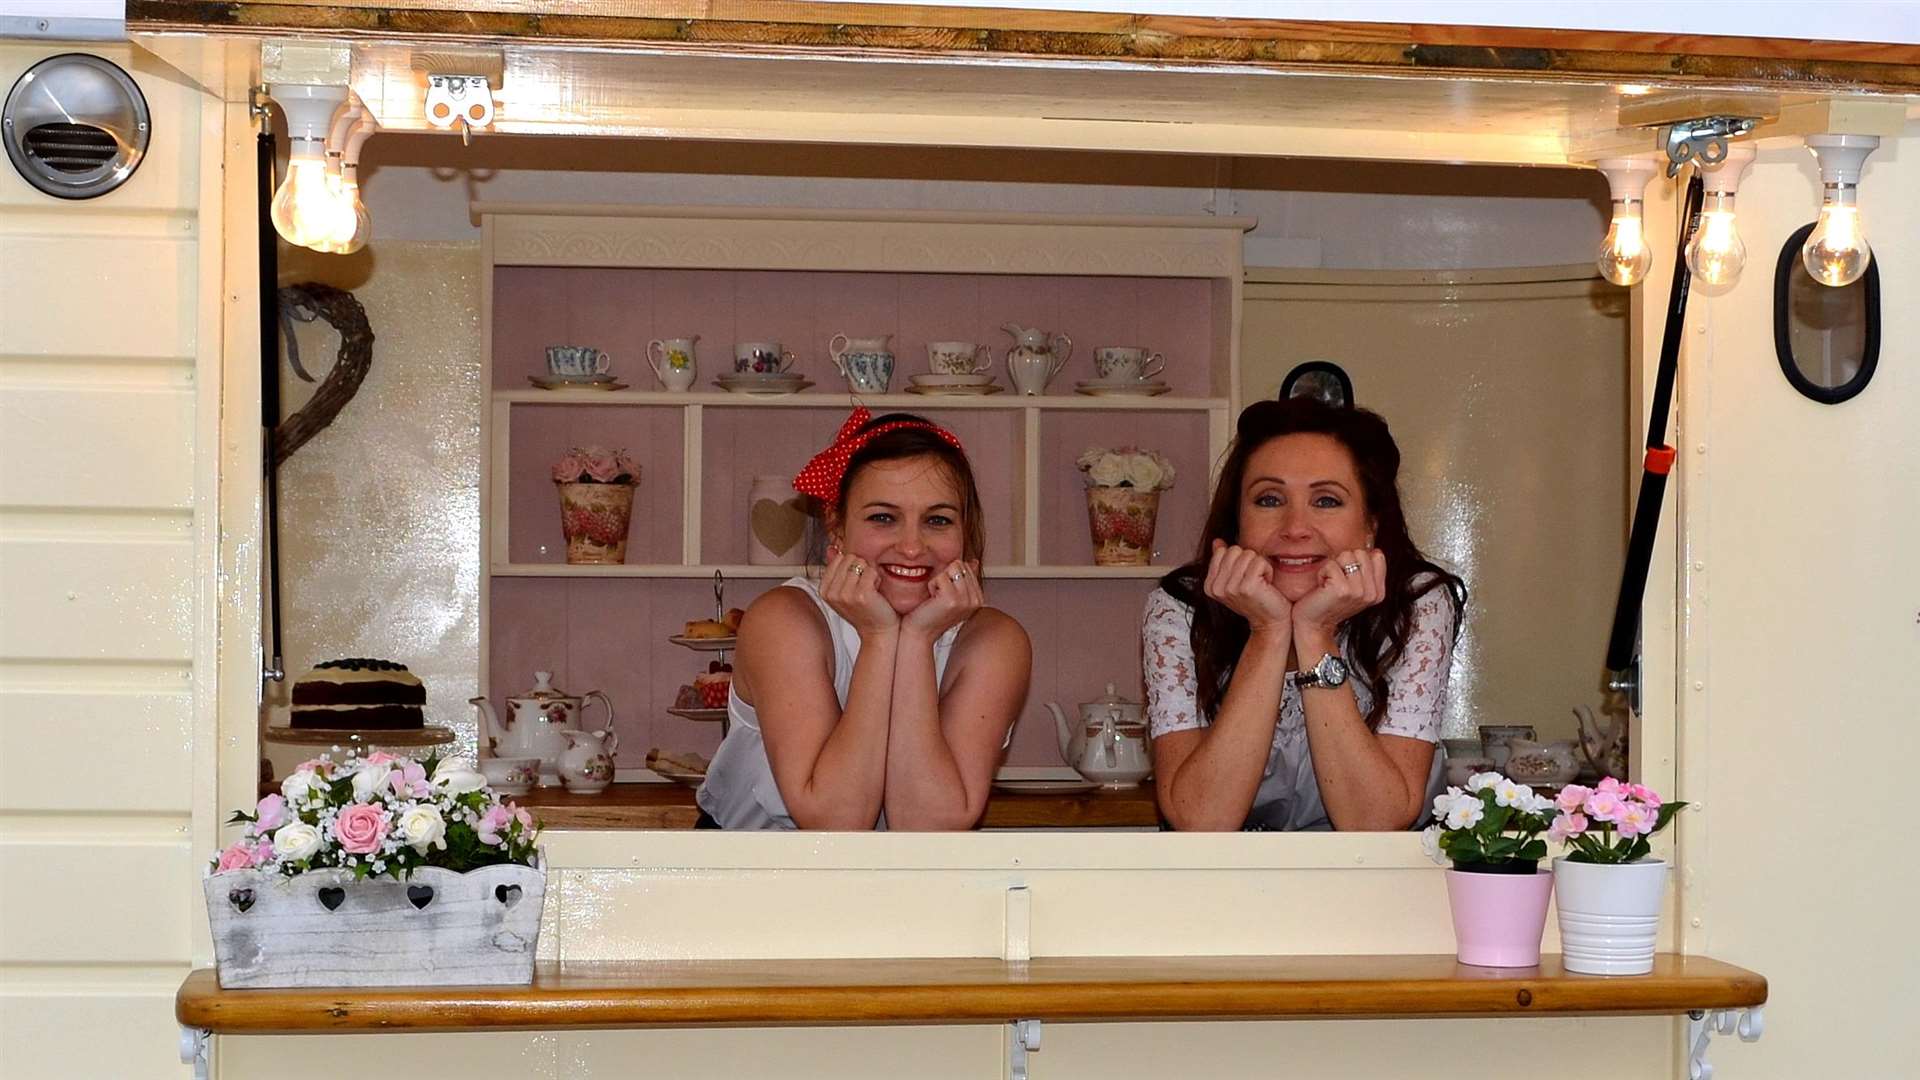 Sophie Dean and Sarah Moroney launched Pretty Little Tea, a mobile catering business which operates from a converted horsebox, earlier this month